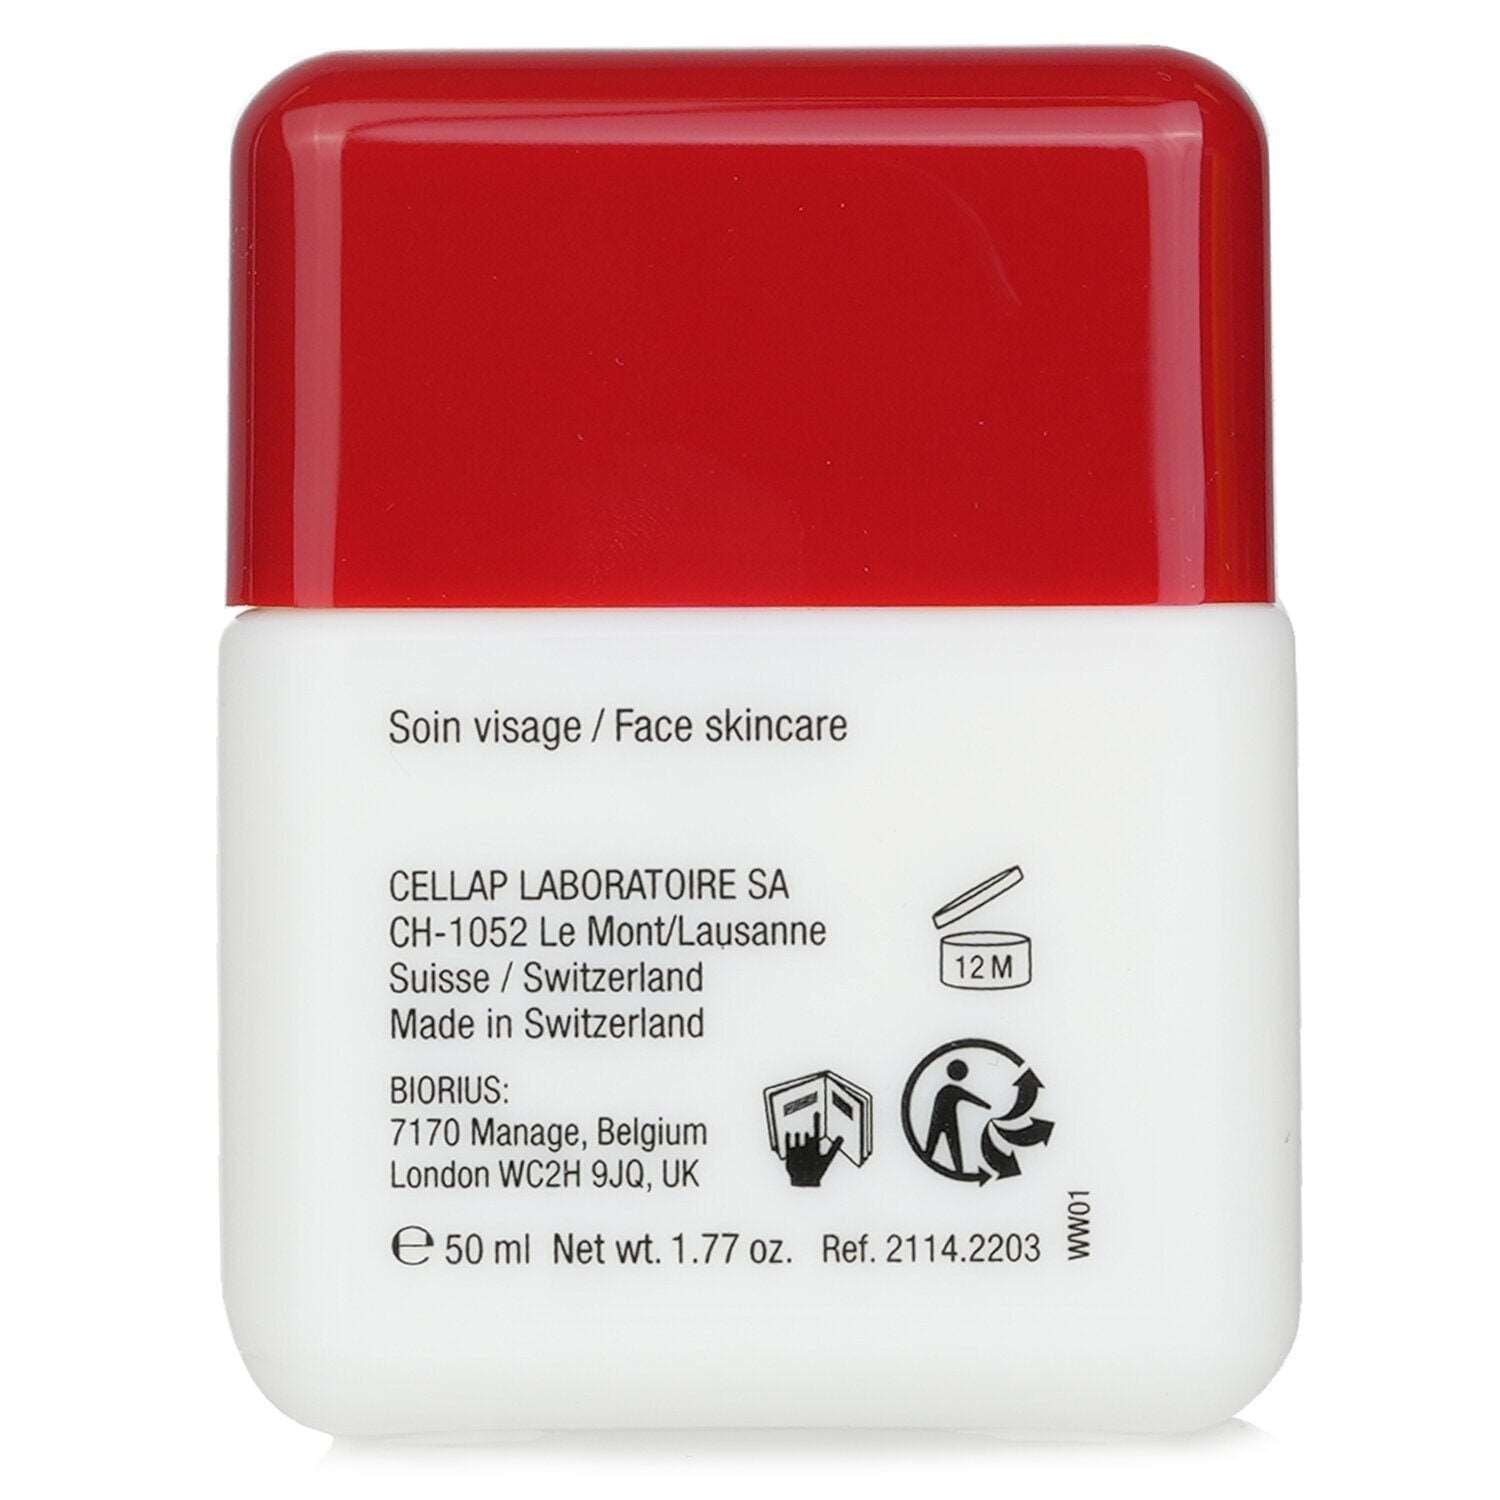 CELLCOSMET & CELLMEN - Cellcosmet Concentrated Revitalising Cellular Cream - 50ml/1.77oz 3P's Inclusive Beauty